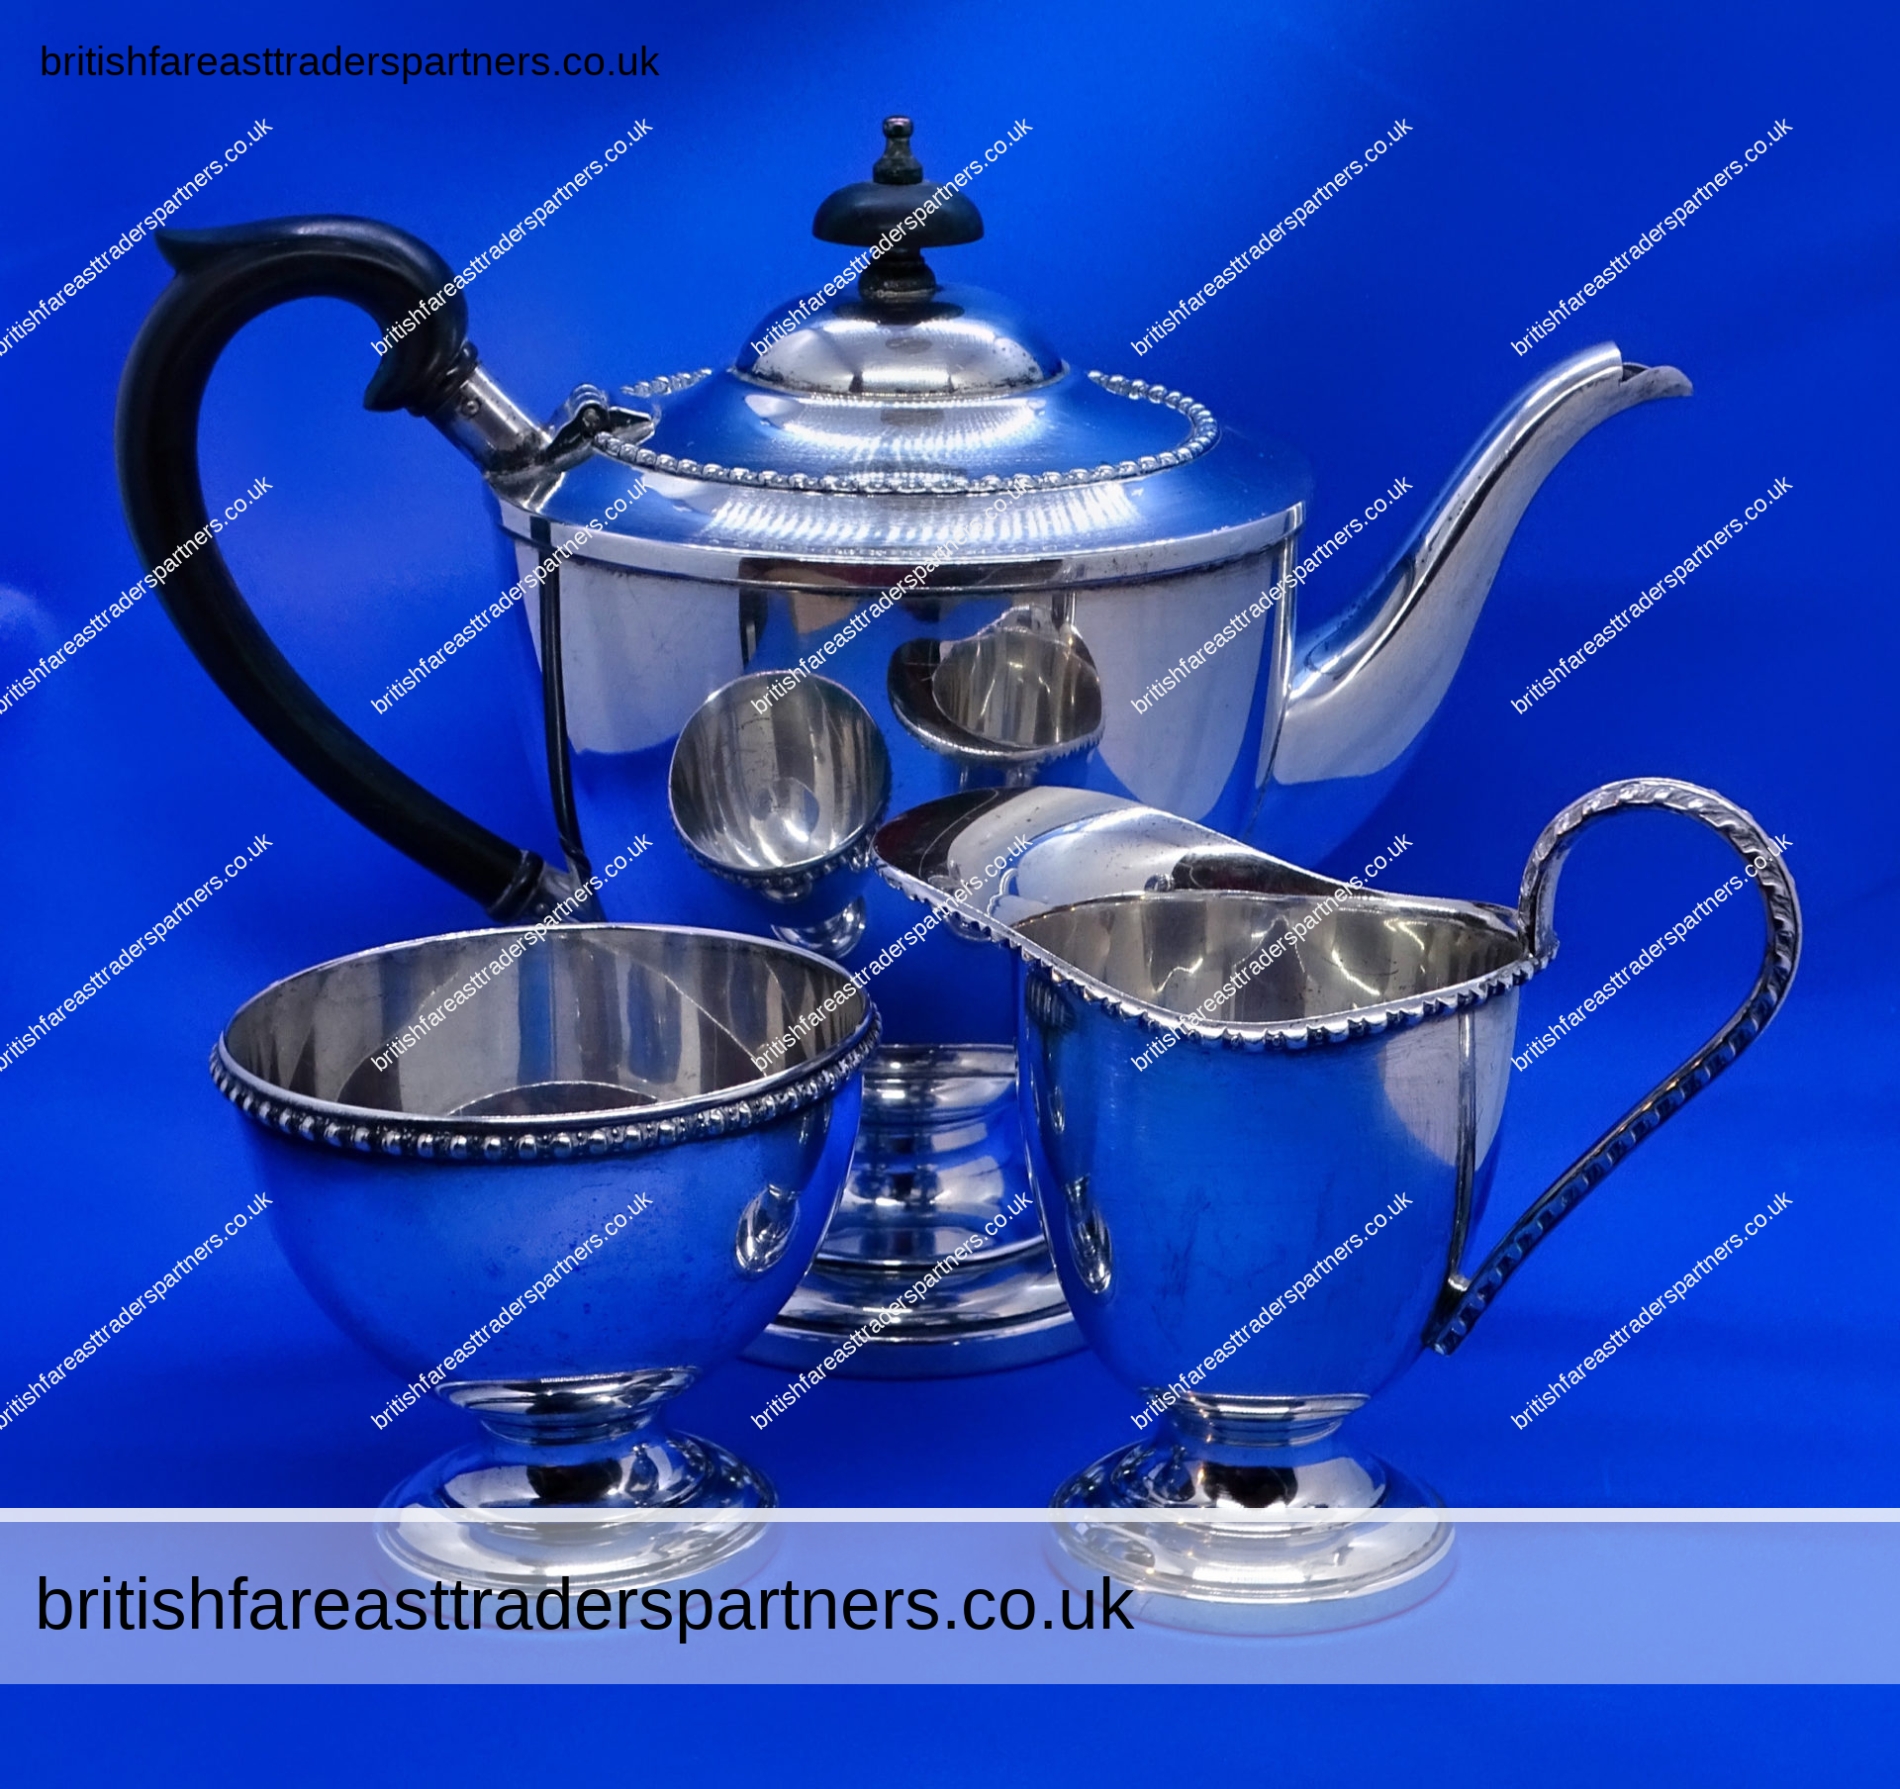 ANTIQUE EDWARDIAN COFFEE SET NEOCLASSICAL STYLE REVIVAL “RAND OF ENGLAND” NICKEL SILVER PLATED COFFEE SET | EDWARDIAN | NEOCLASSICAL | ANTIQUES | COLLECTABLES | DRINKWARE |  HOLLOWARE | KITCHENALIA | LIFESTYLE | CULTURE | HERITAGE